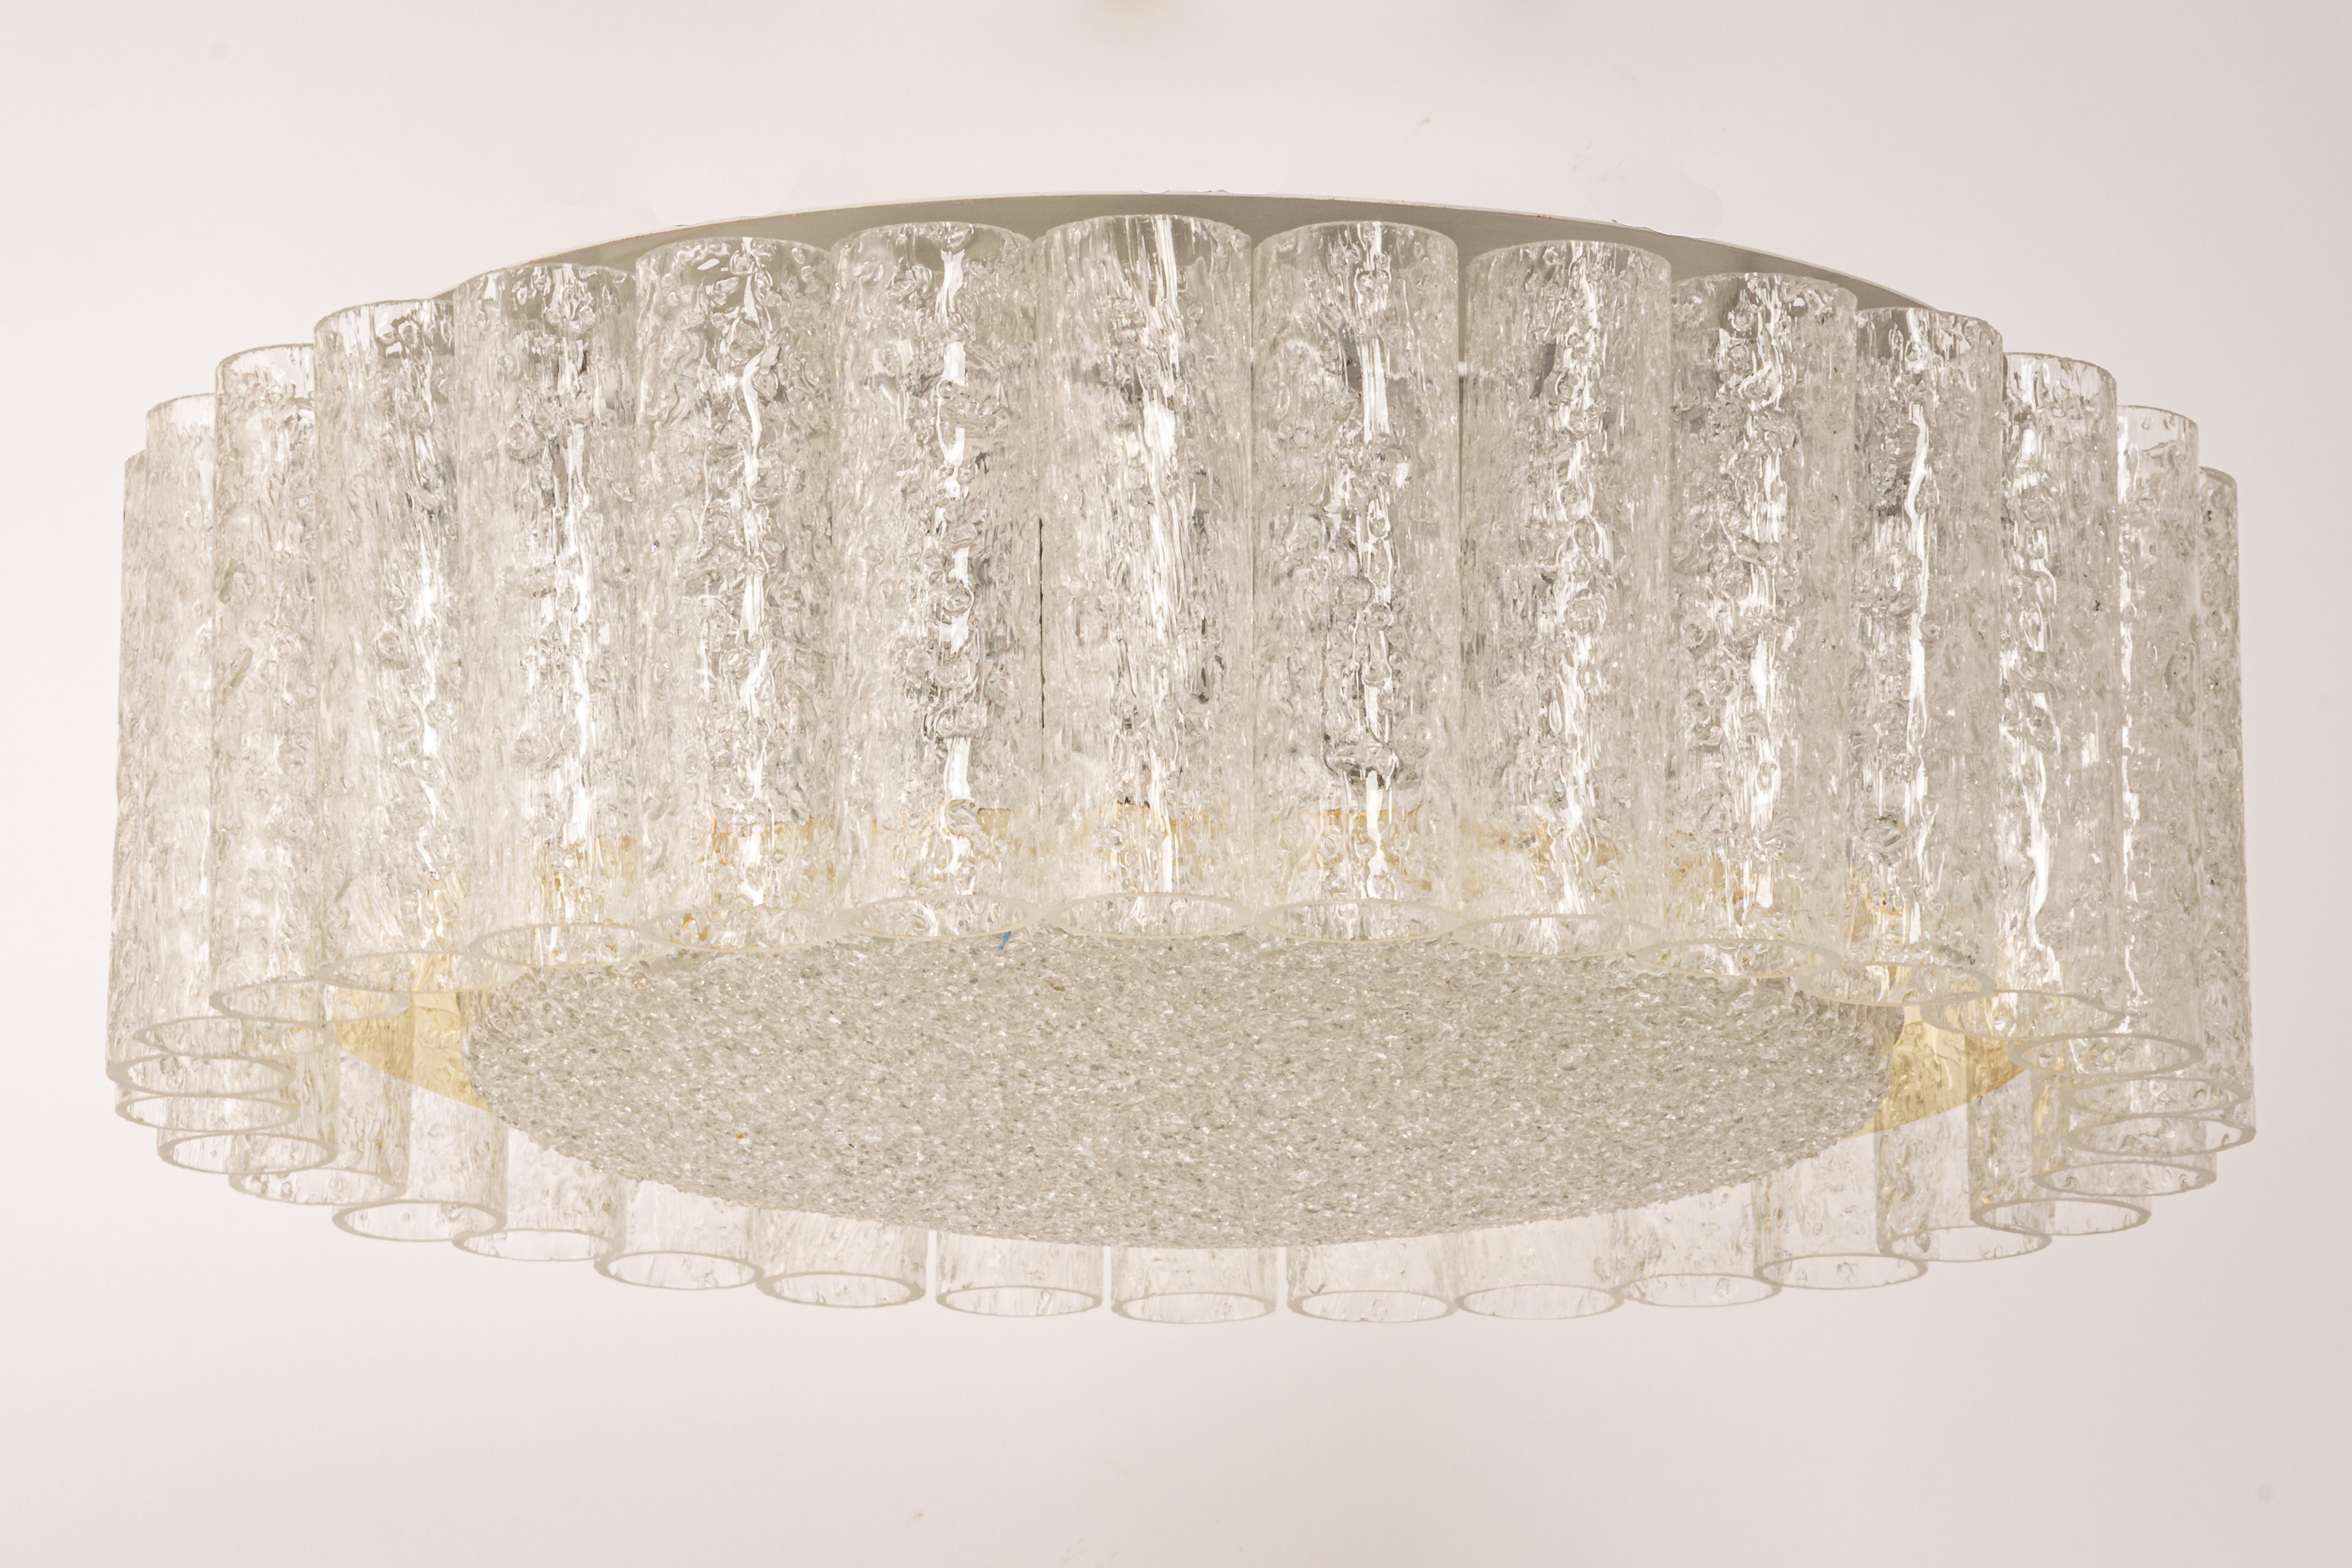 Fantastic mid-century chandelier by Doria, Germany, manufactured, circa 1960-1969. Many Murano glass cylinders suspended from the fixture.

High quality and in very good condition. Cleaned, well-wired, and ready to use. 

The fixture requires 6